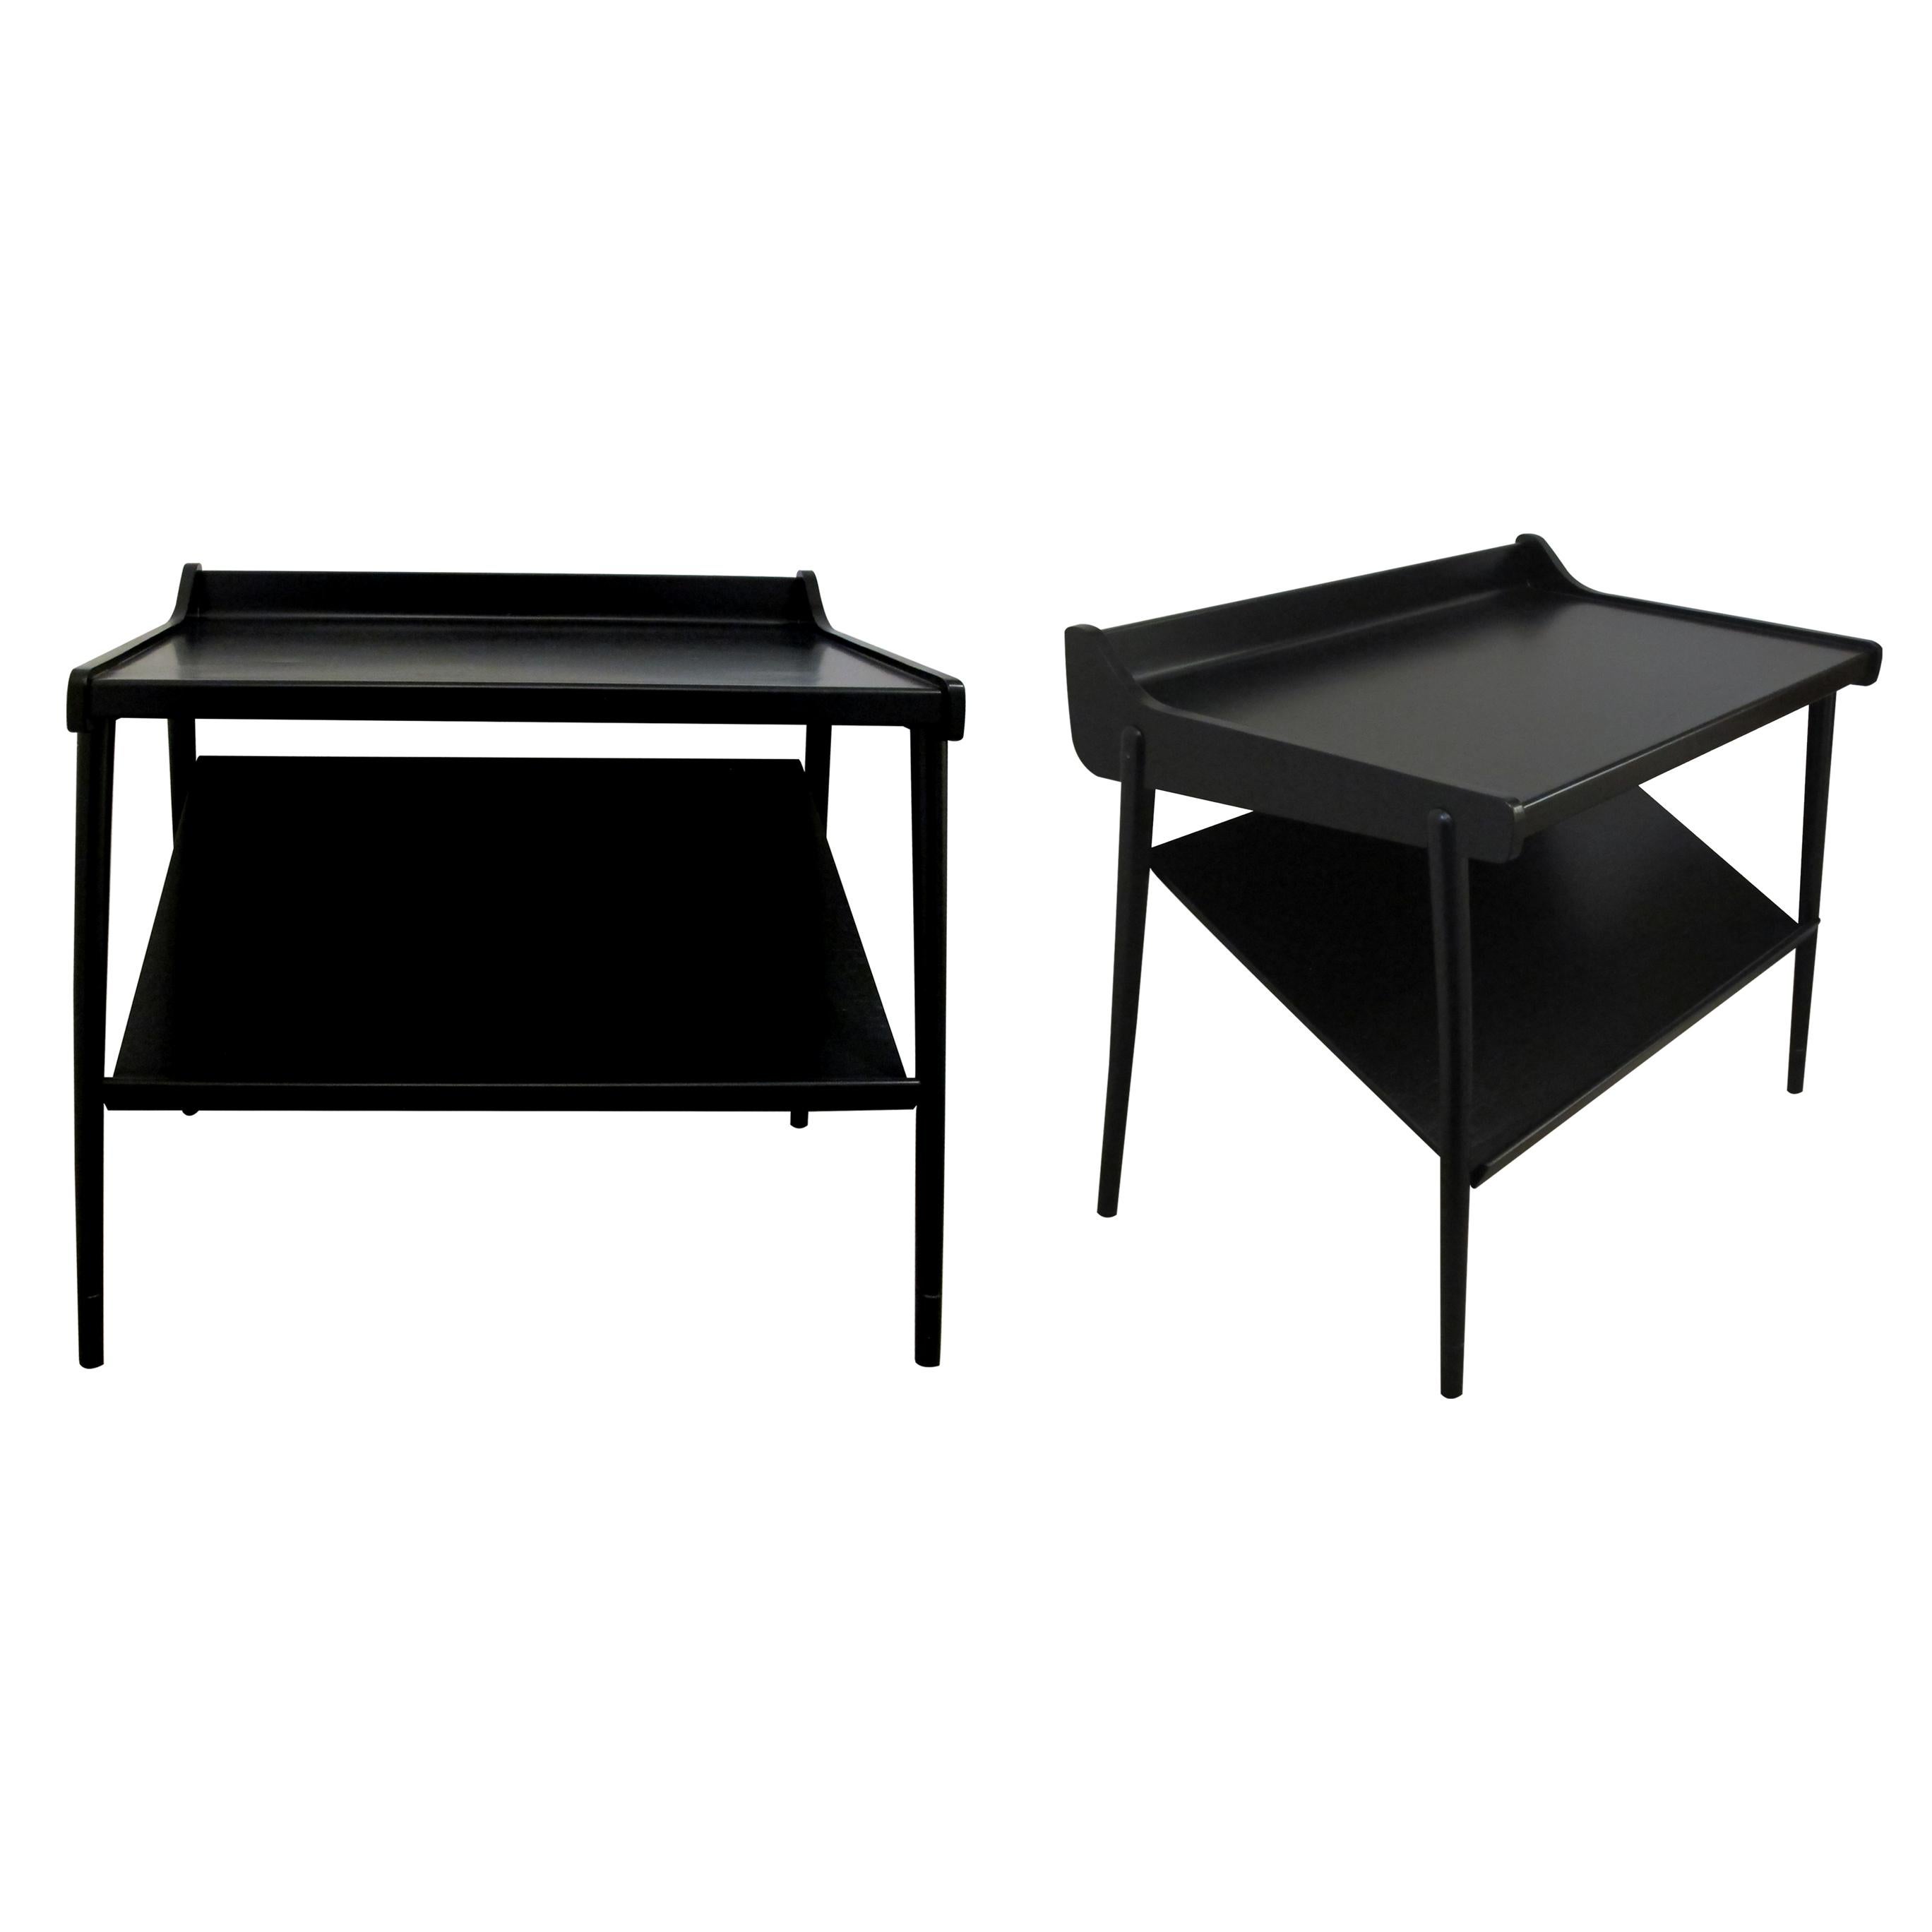 A pair of ebonized midcentury side or bedside tables with a structural two-tier design. The two tiers are mounted on four thin spindle legs. Very elegant tables which will fit into most settings. 

Size: H 57 cm x W 60 cm x D 40 cm.
 